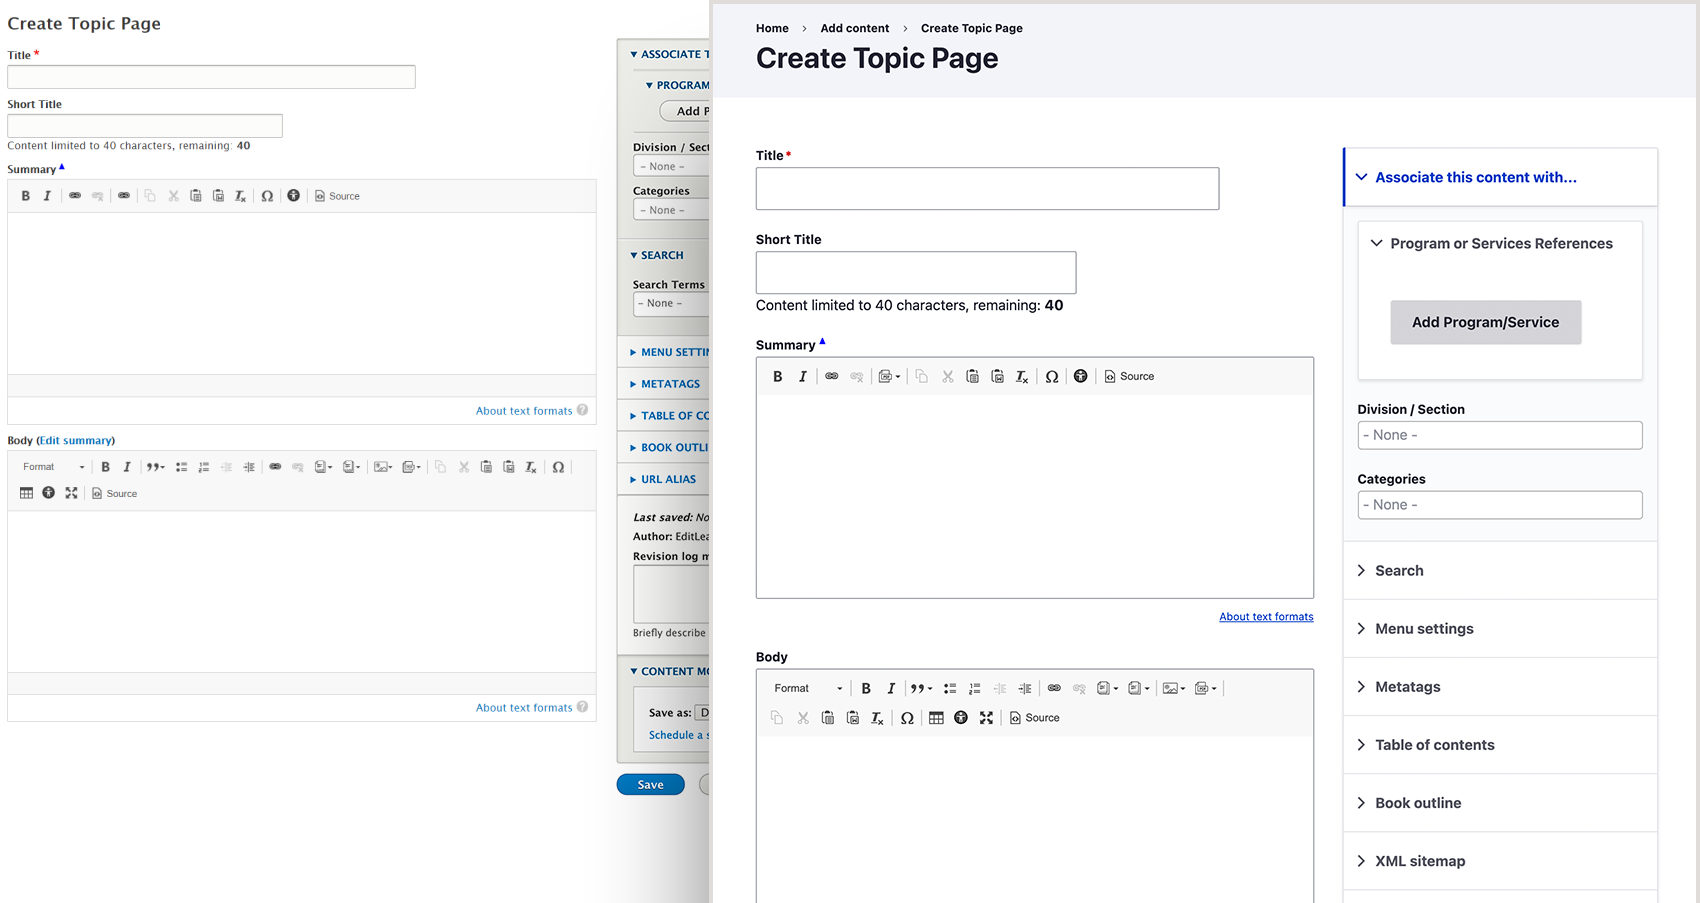 Comparison of how the "Create Topic Page" screen looked before and after the update to Claro.